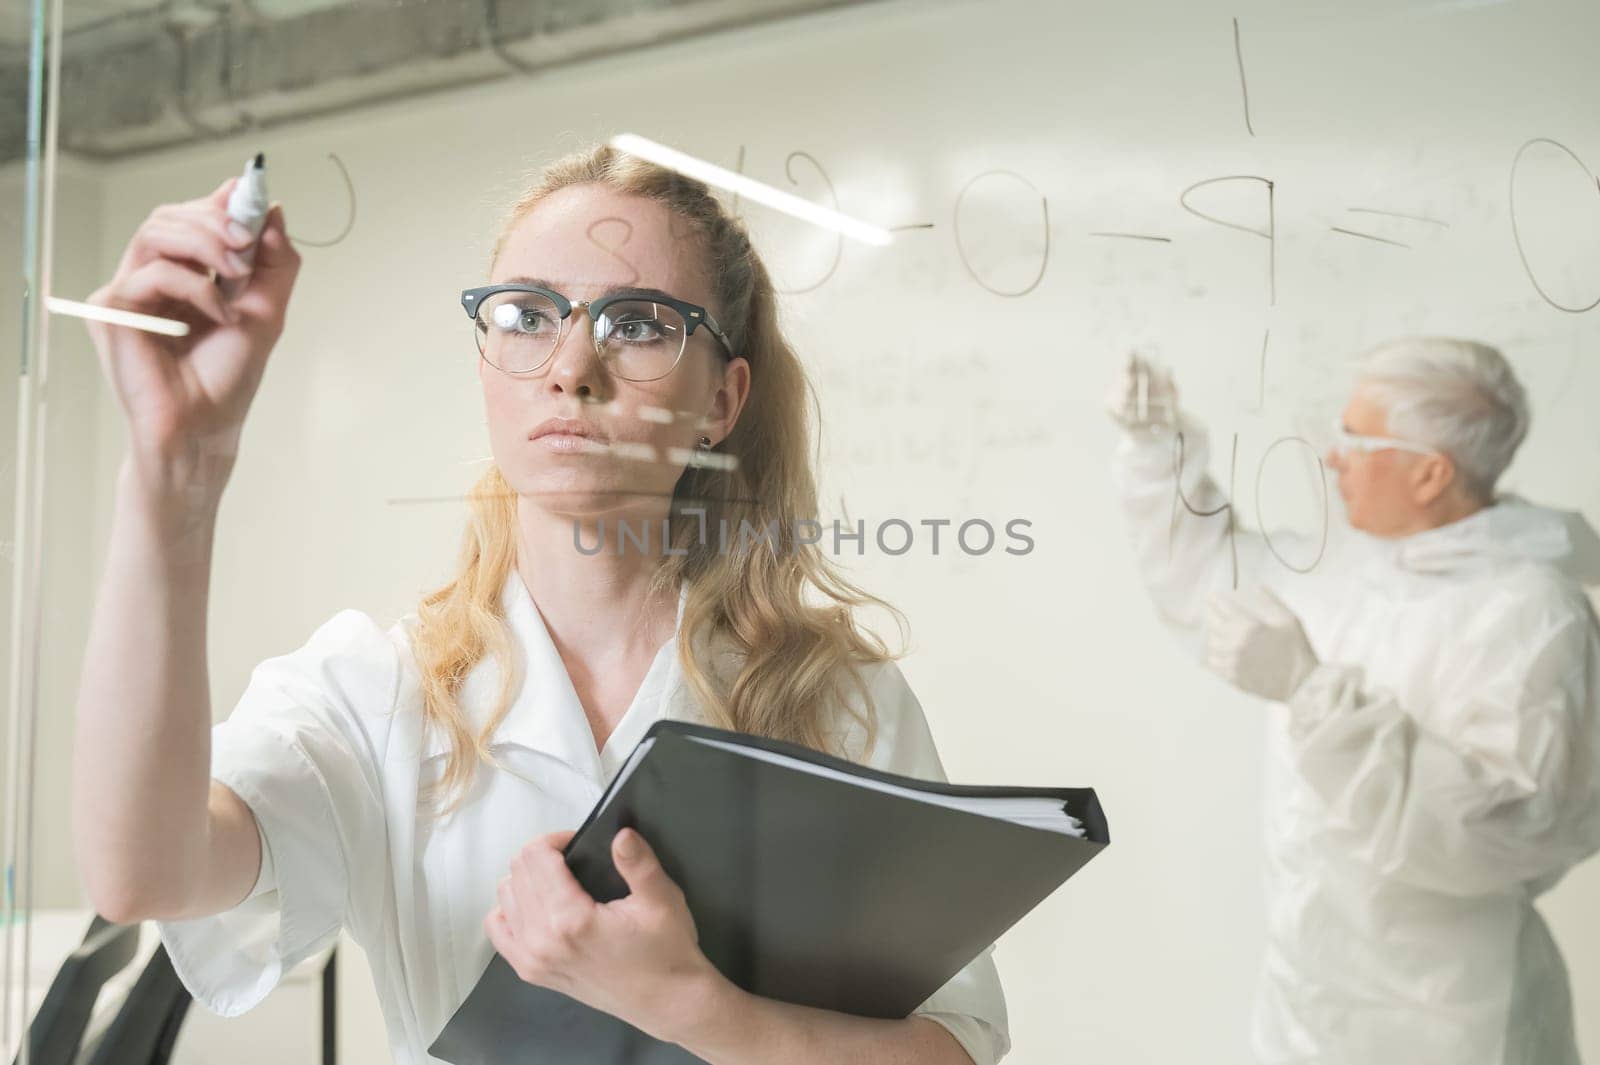 A woman chemist writes a formula on glass. An elderly Caucasian man in a protective suit is doing tests